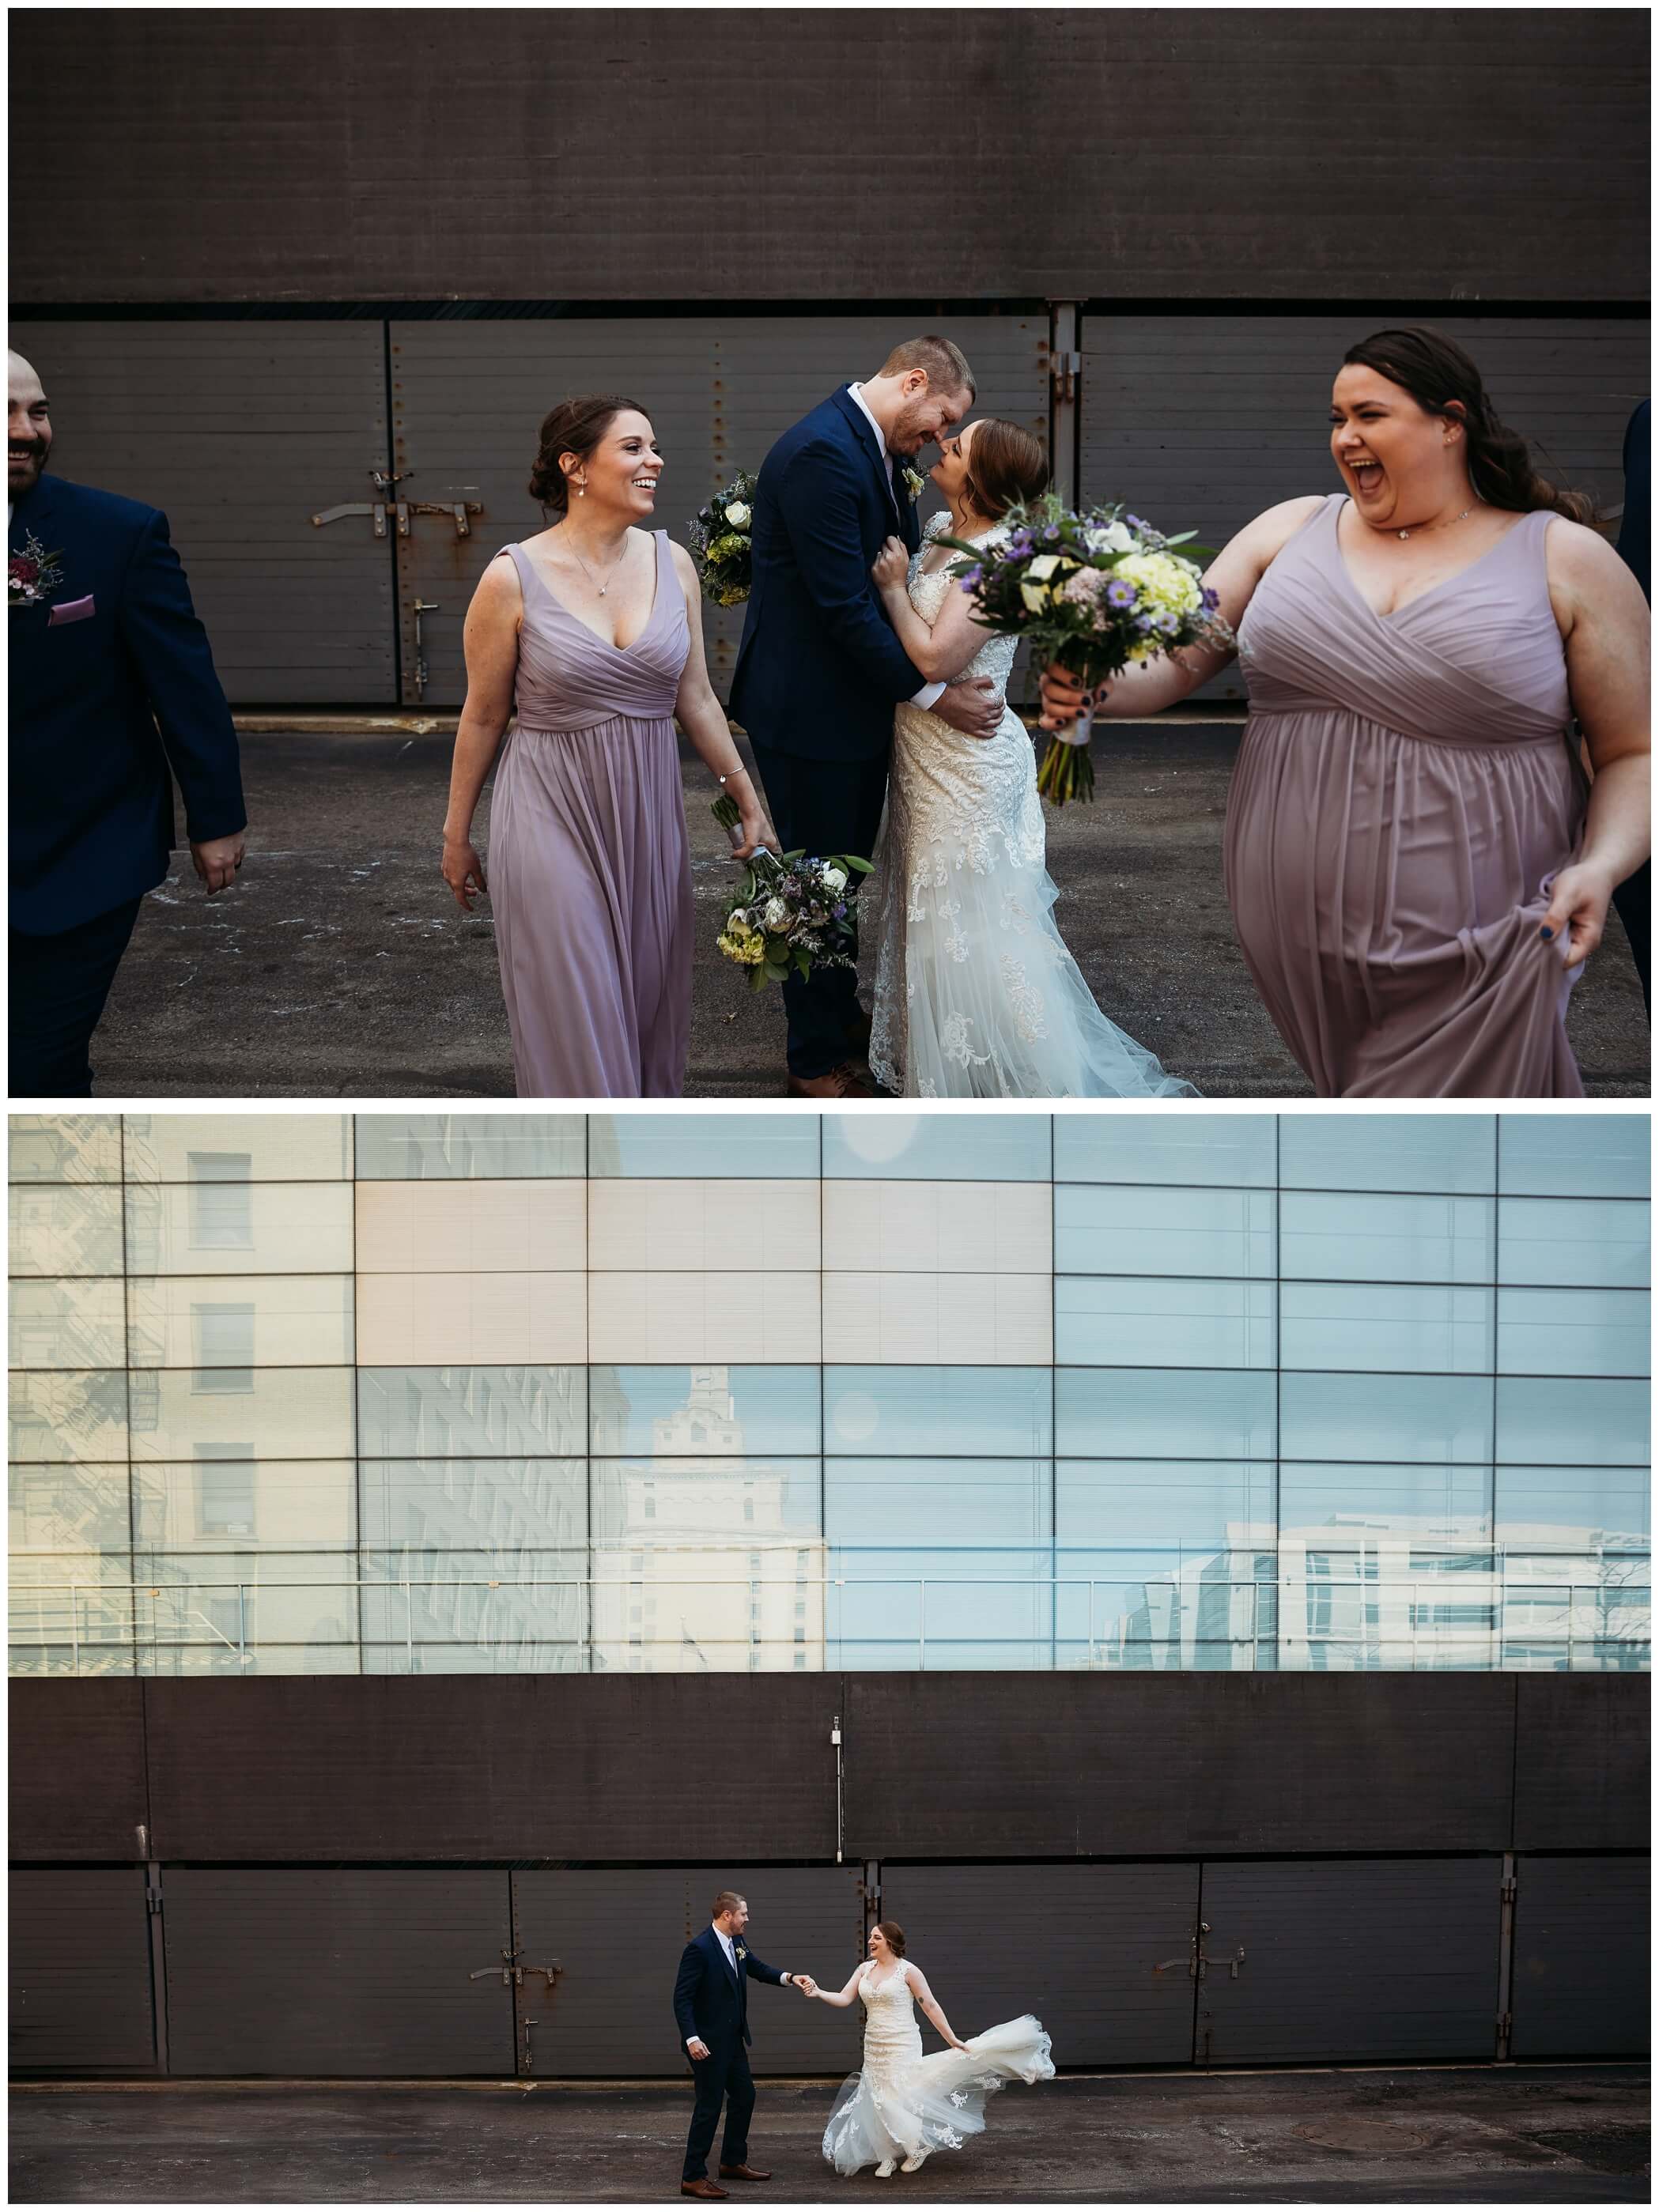 Wedding day photos outside of the Figge Art Museum in downtown Davenport, Iowa